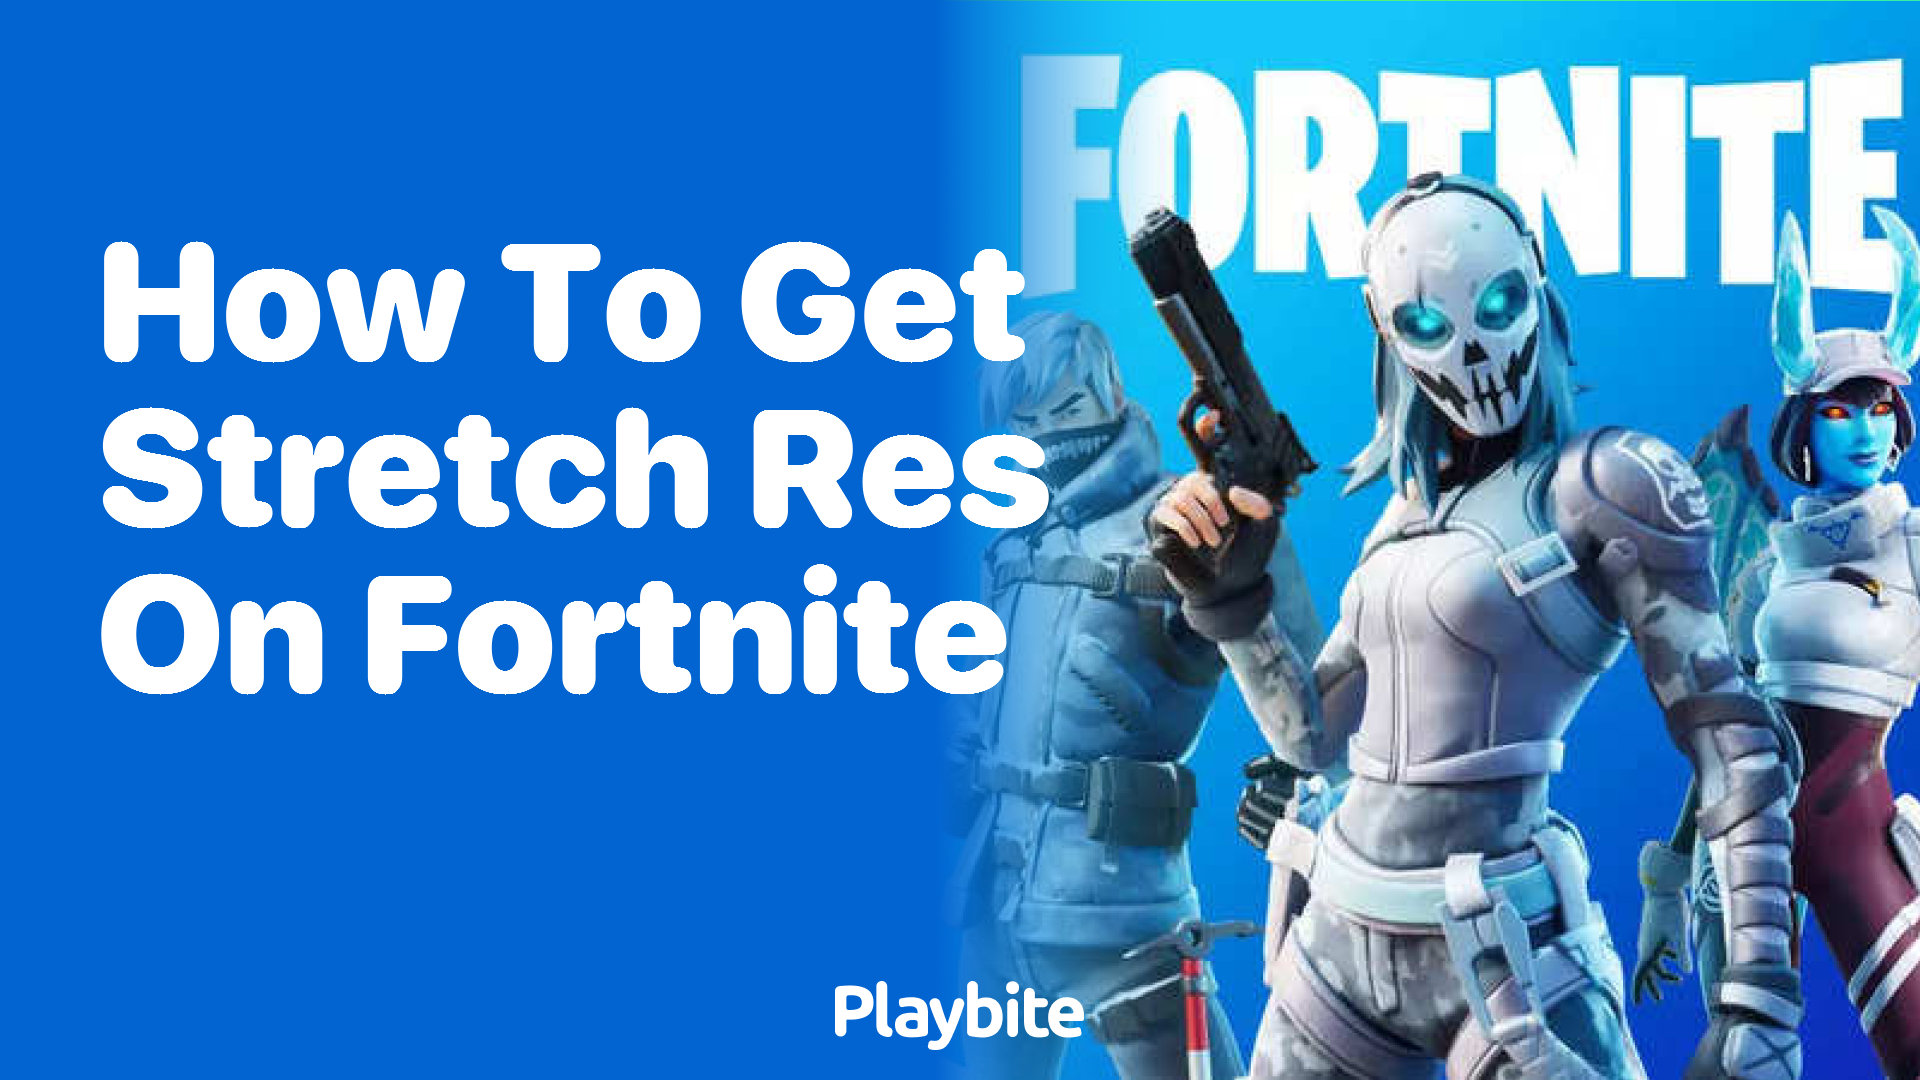 How to Get Stretch Res on Fortnite: A Simple Guide